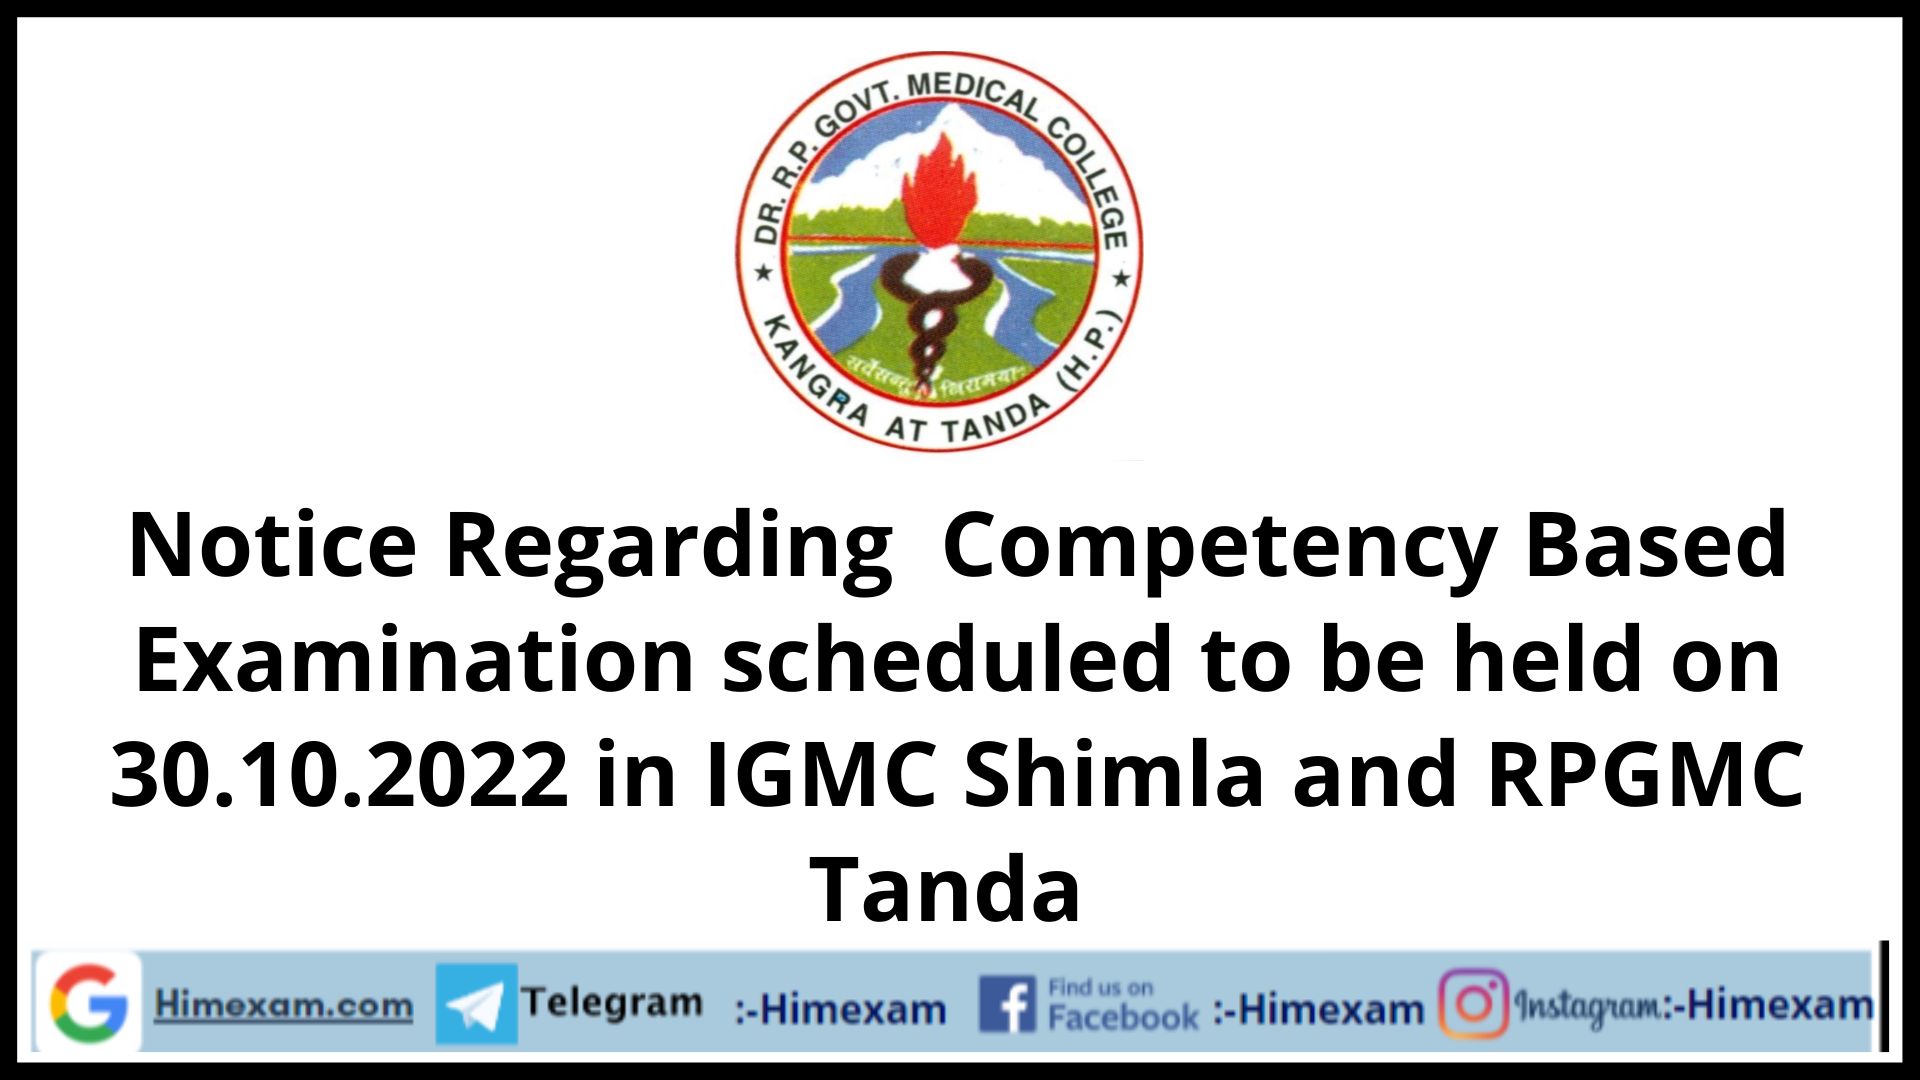 Notice Regarding  Competency Based Examination scheduled to be held on 30.10.2022 in IGMC Shimla and RPGMC Tanda